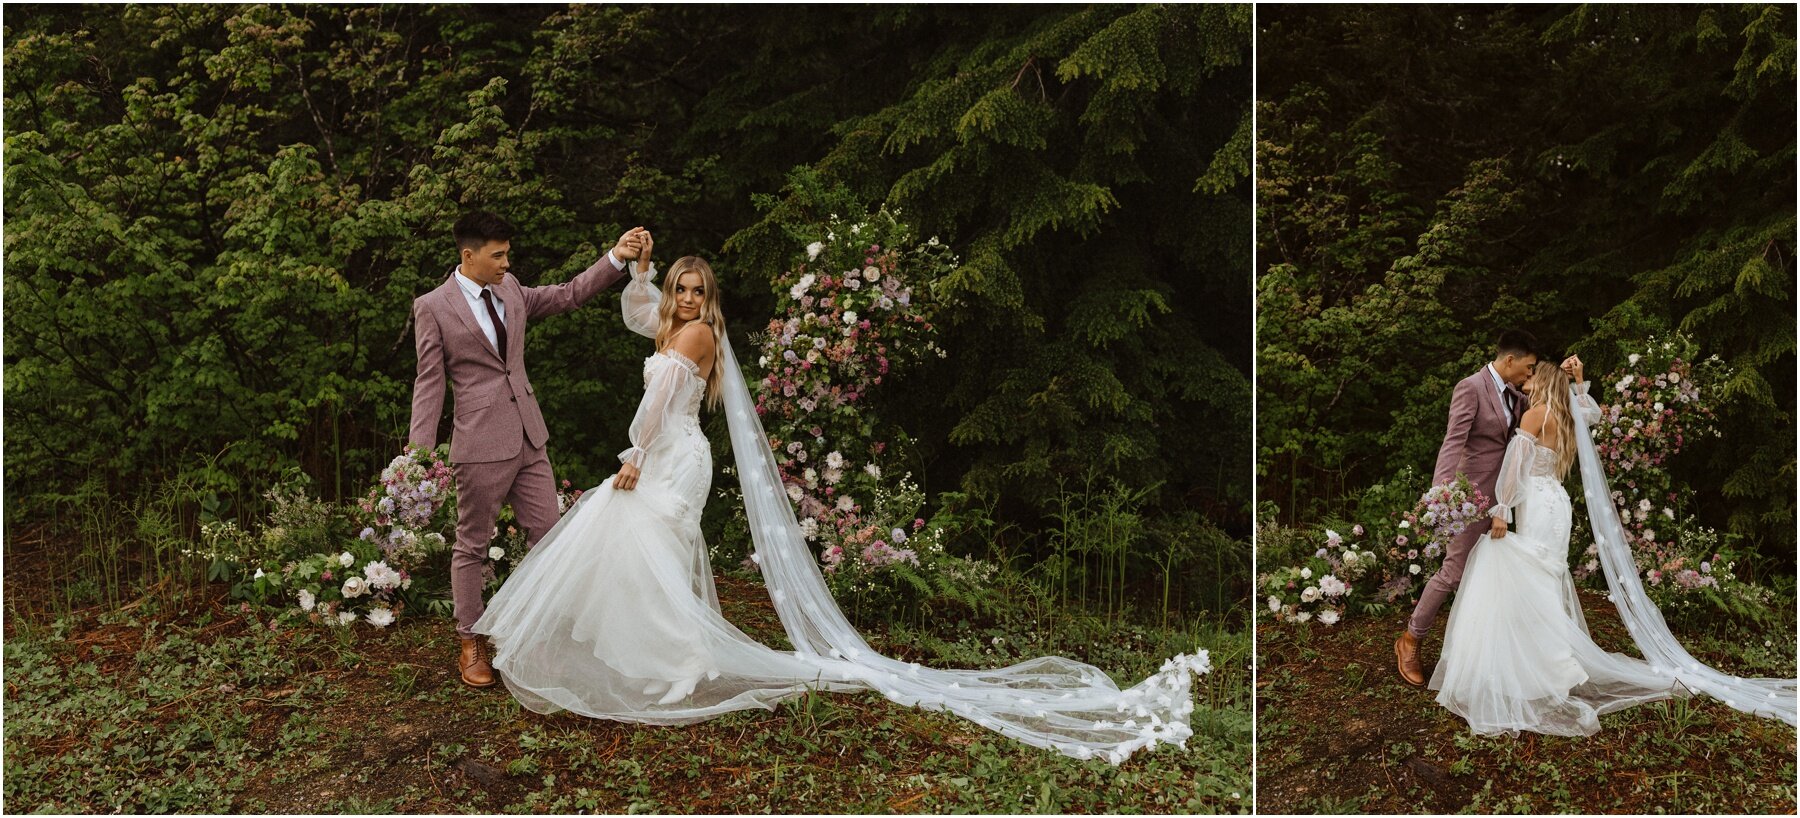 Session at Seattle Forest - erika greene photography - elopement photographer_0016.jpg